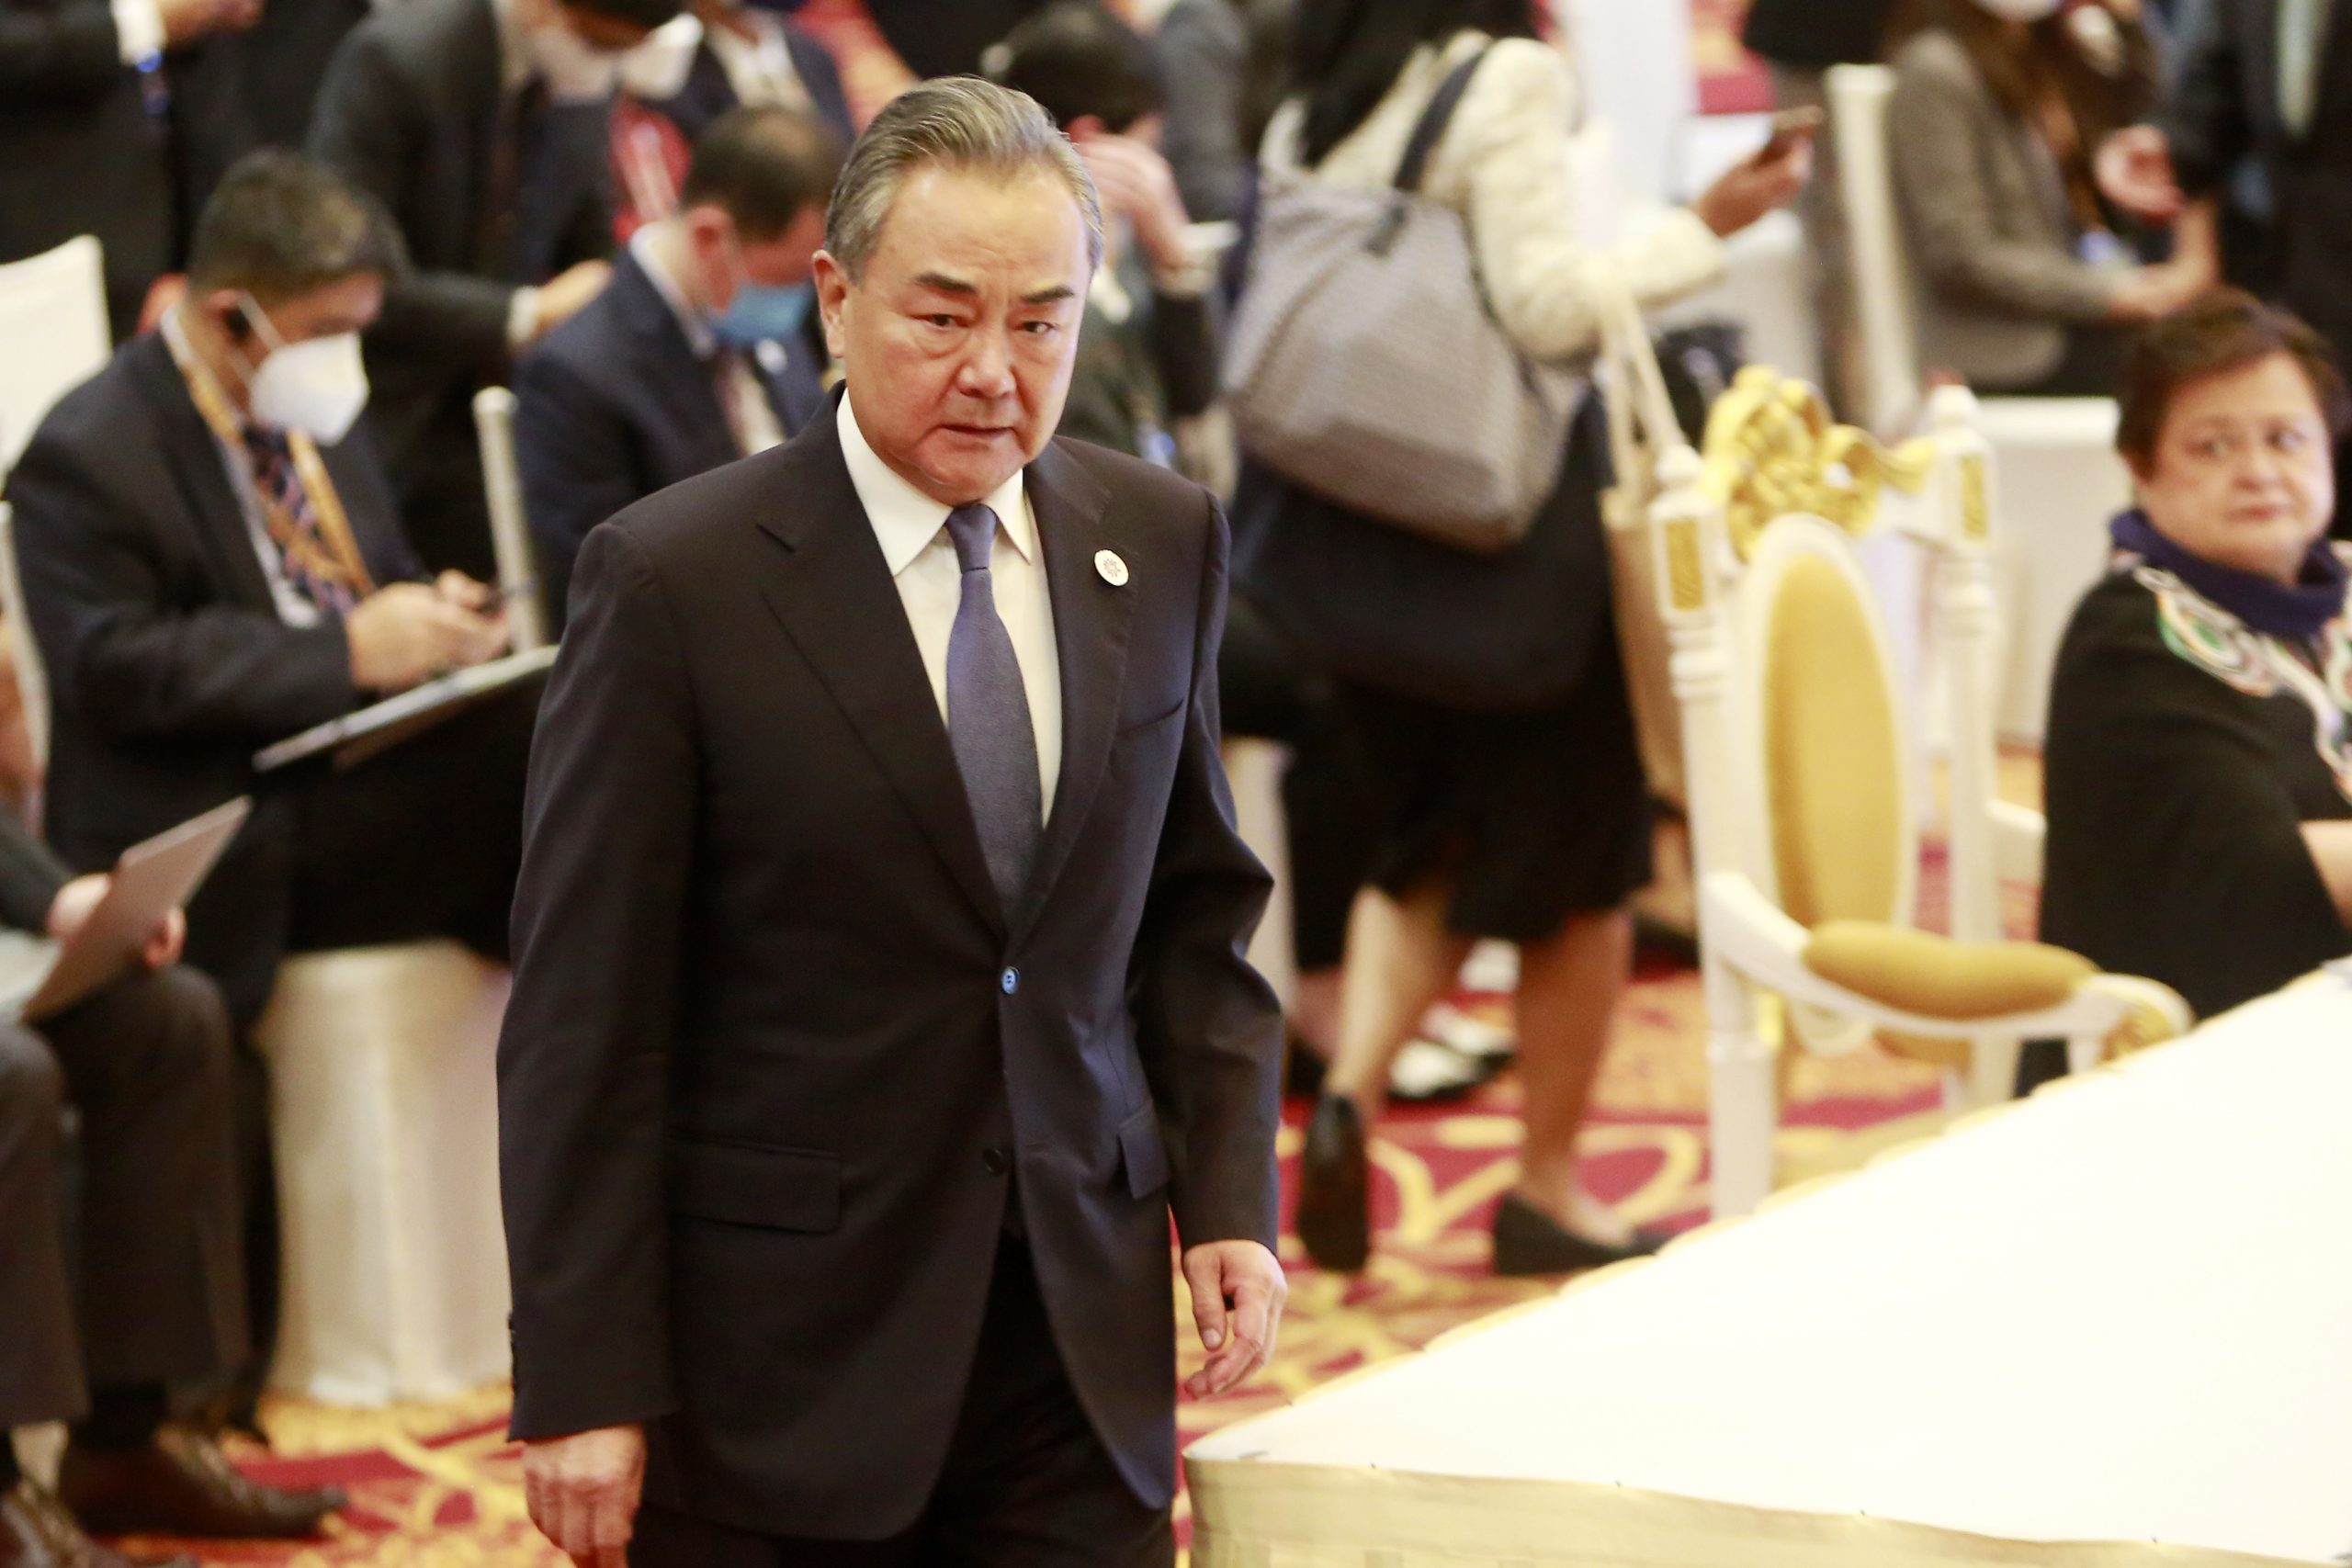 epa10104958 Chinese Foreign Minister Wang Yi (C) attends the ASEAN-China Ministerial Meeting at a hotel in Phnom Penh, Cambodia, 04 August 2022. Cambodia is hosting the 55th ASEAN Foreign Ministers' Meeting (AMM) and related meetings from 31 July to 06 August 2022.  EPA/KITH SEREY